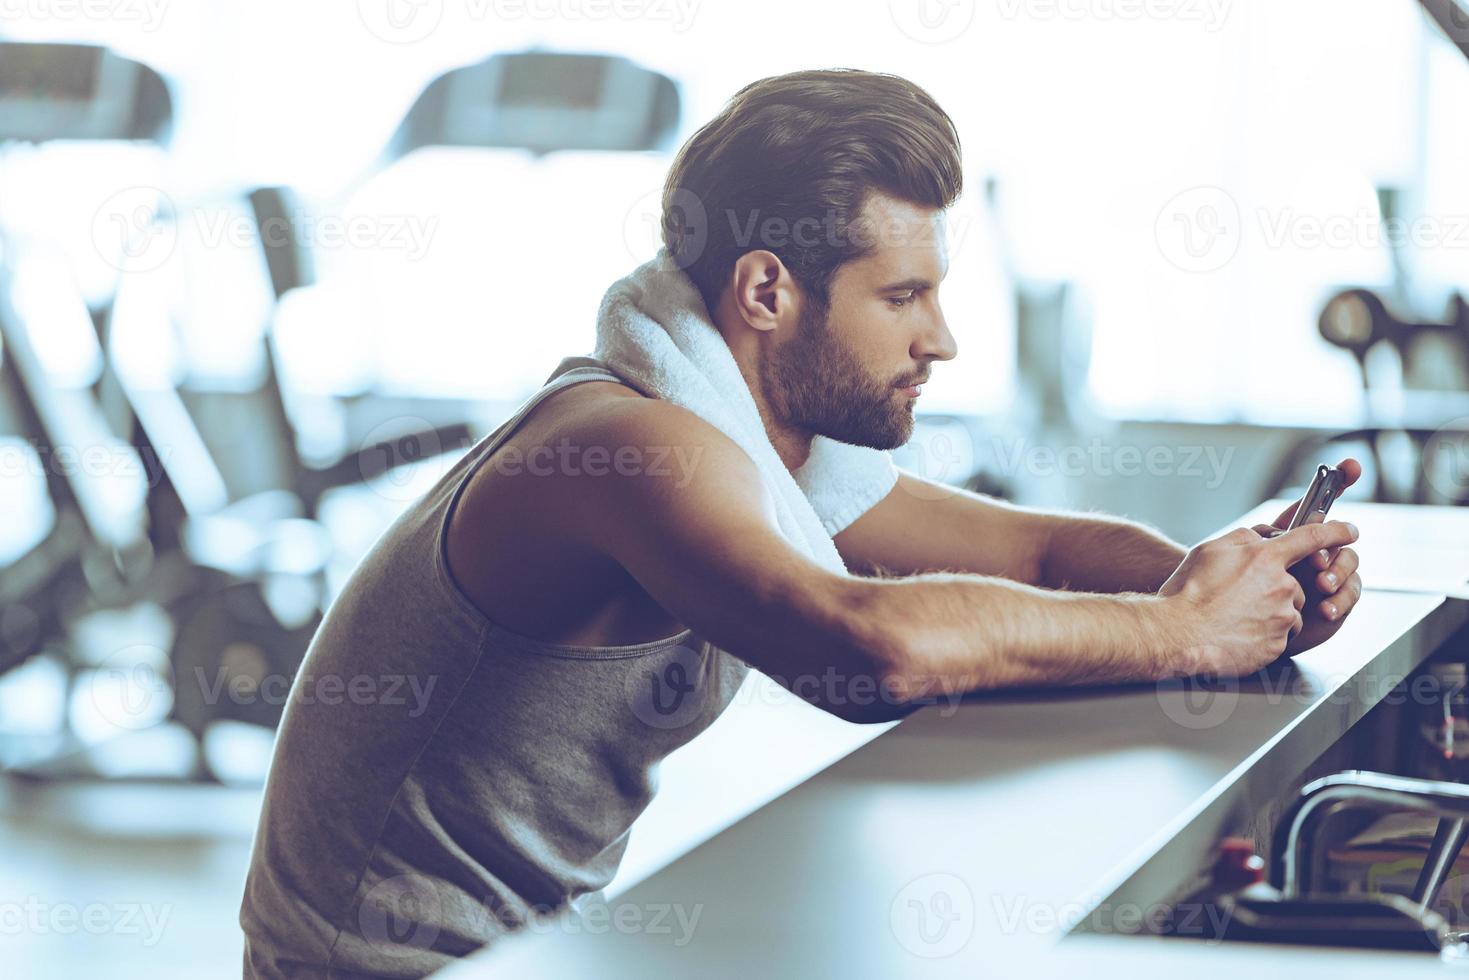 Staying in touch at gym. Side view of handsome young men in sportswear wearing towel on his shoulders and using his smart phone while sitting at bar counter at gym photo